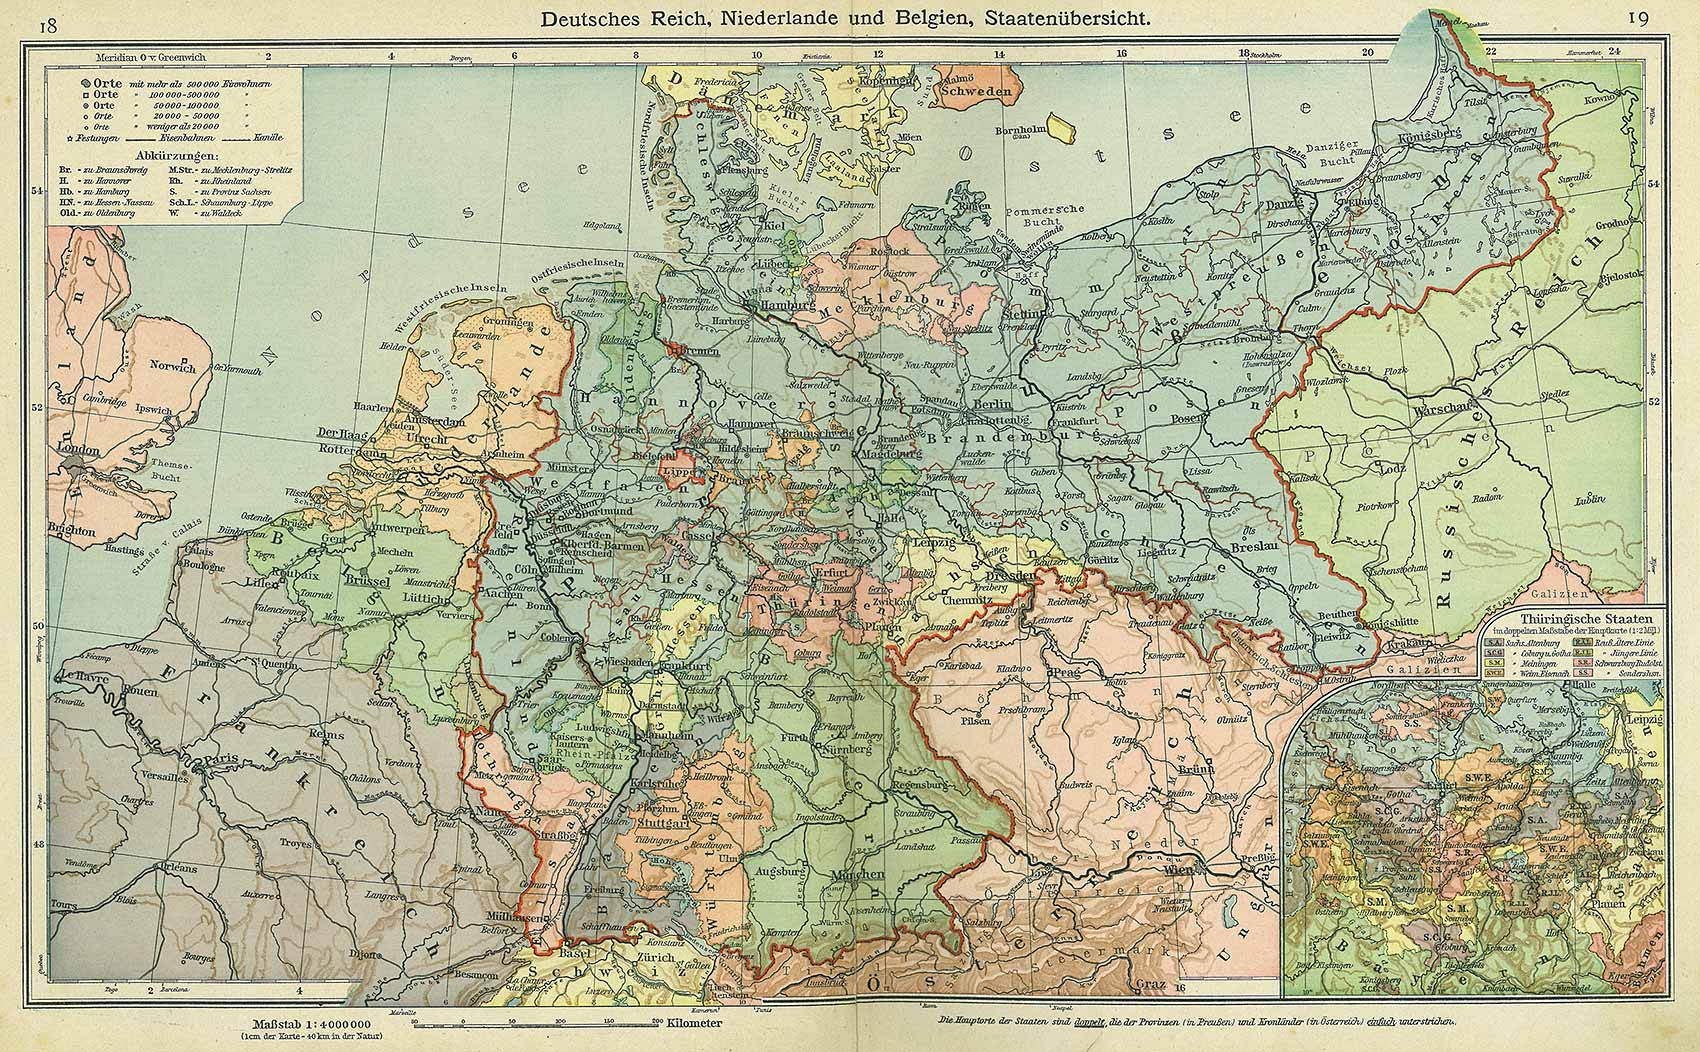 German, Netherlands, and Belgian state borders, Andrees 'Berliner Schul-Atlas', 1916, pages 18 to 19, published size to print borders 42.73 cm wide by 26.7 cm high.